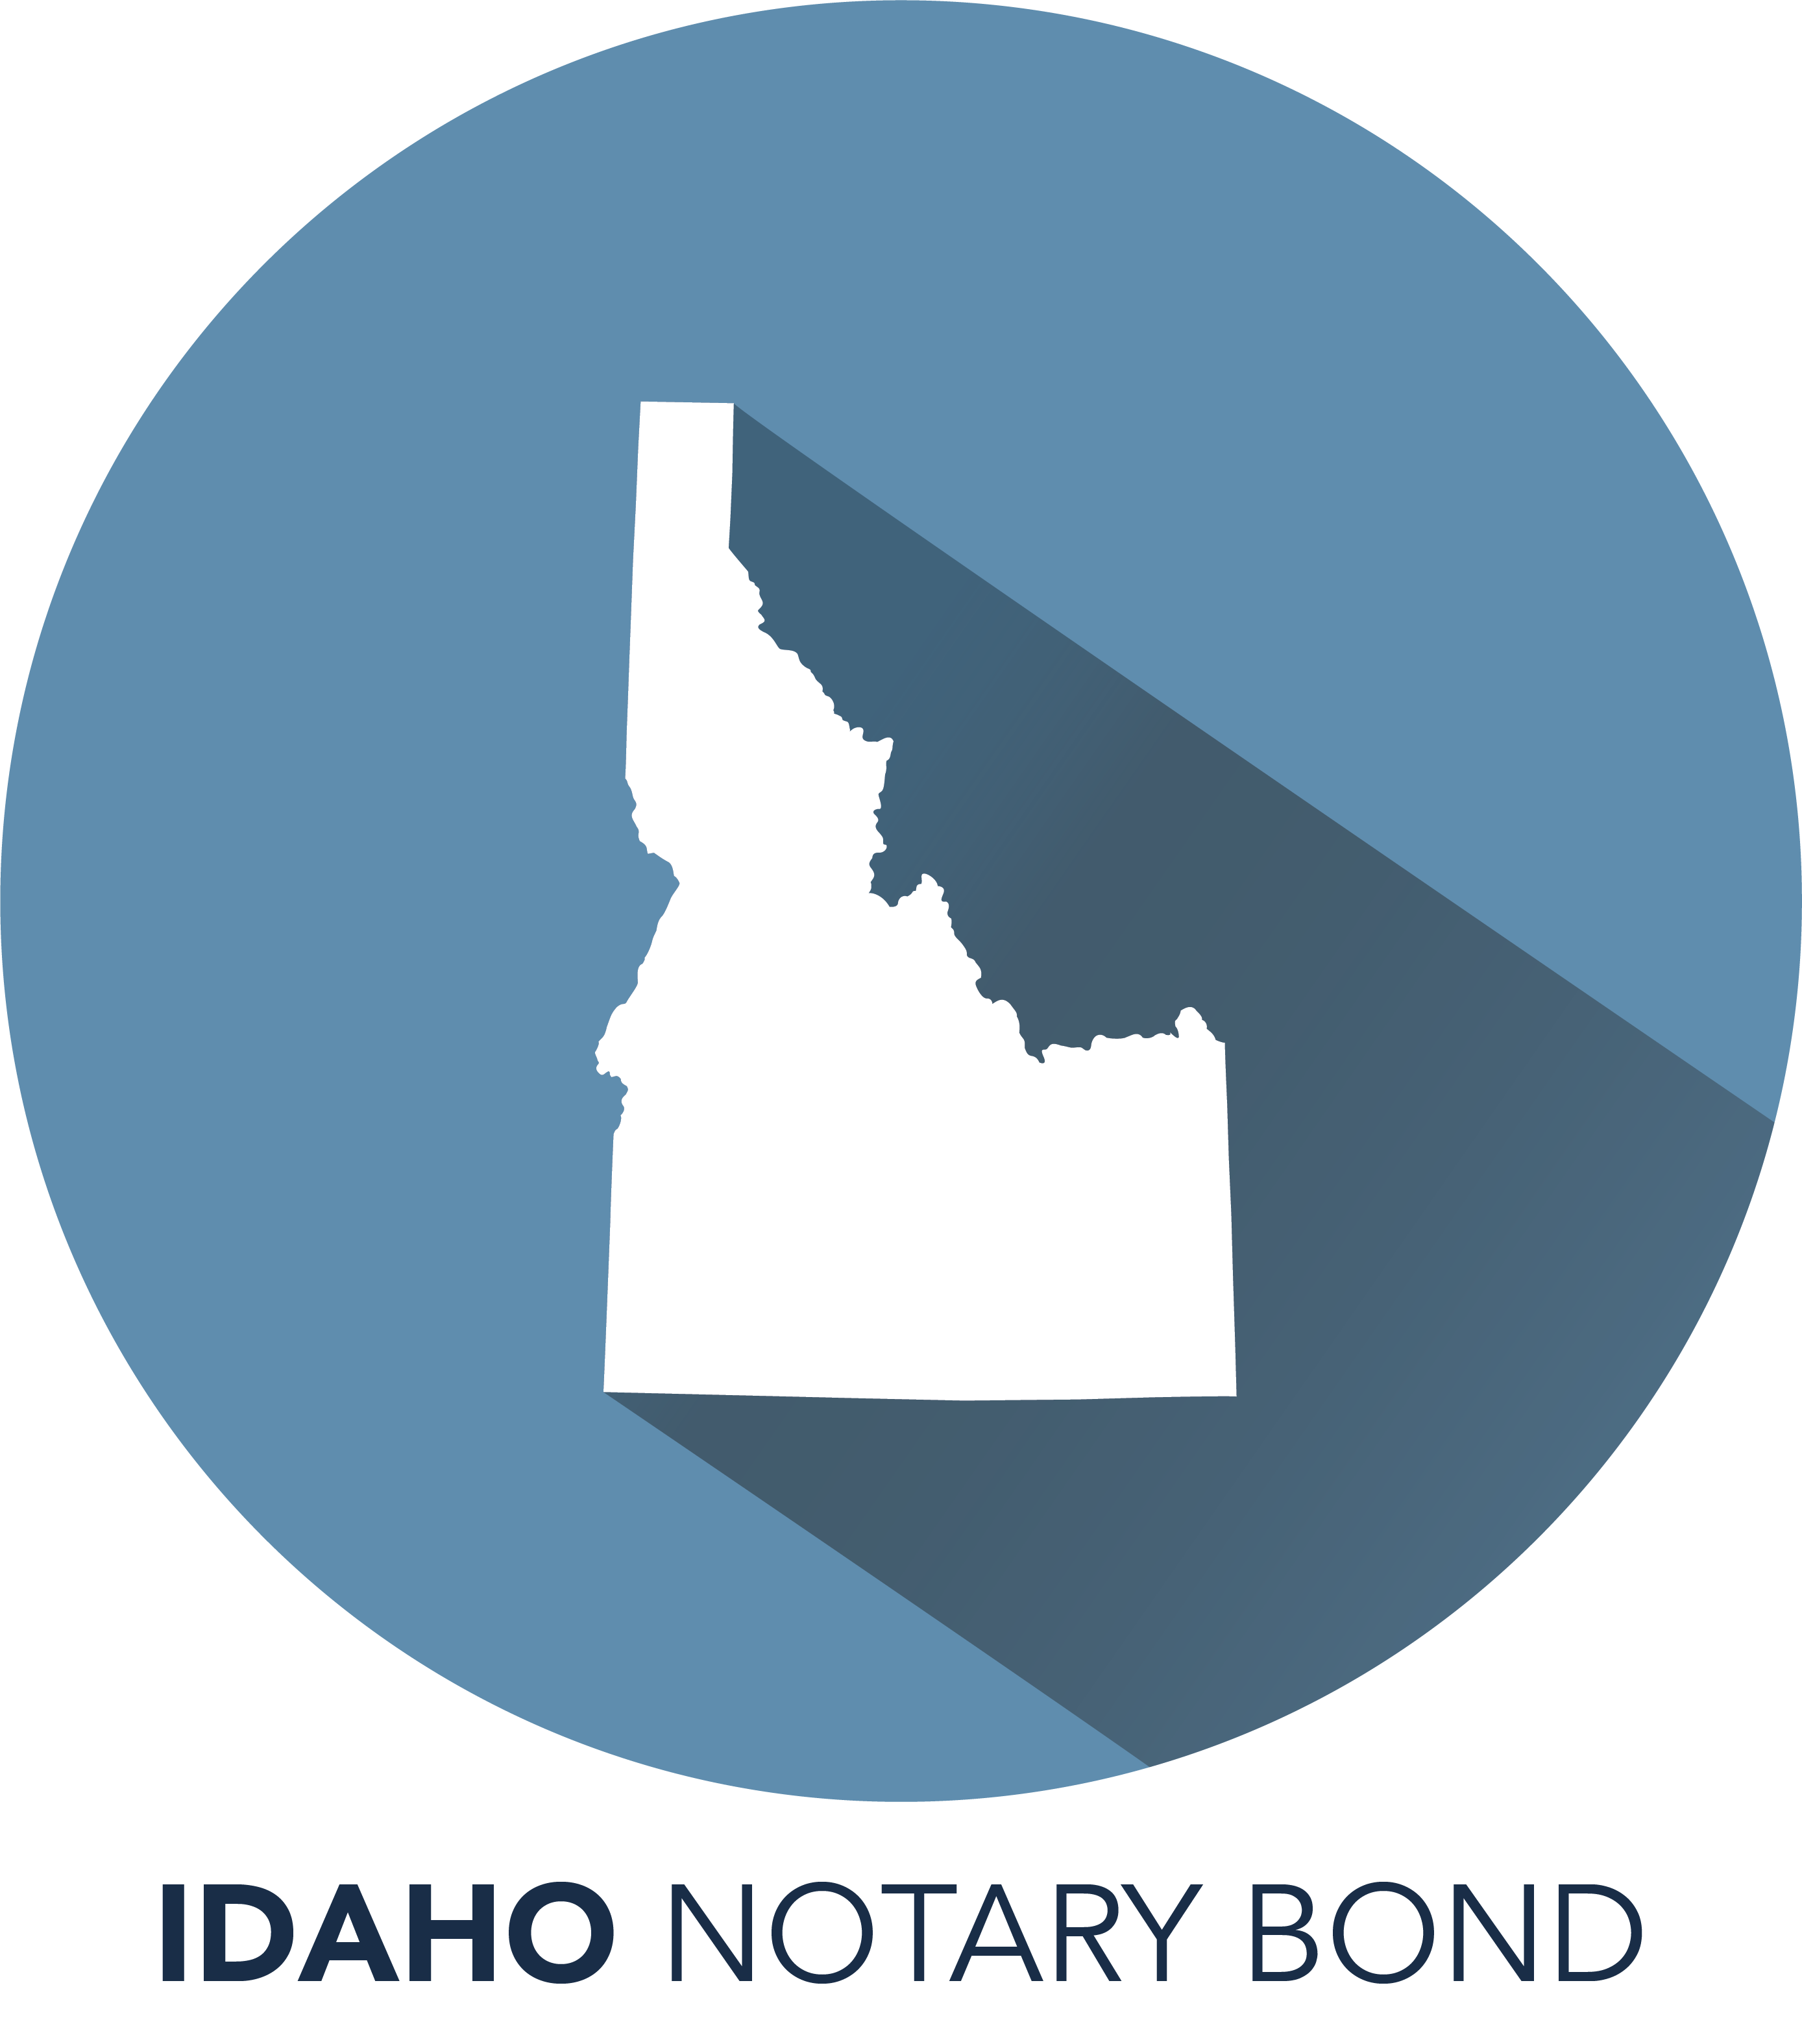 A blue circle with the state of idaho in it